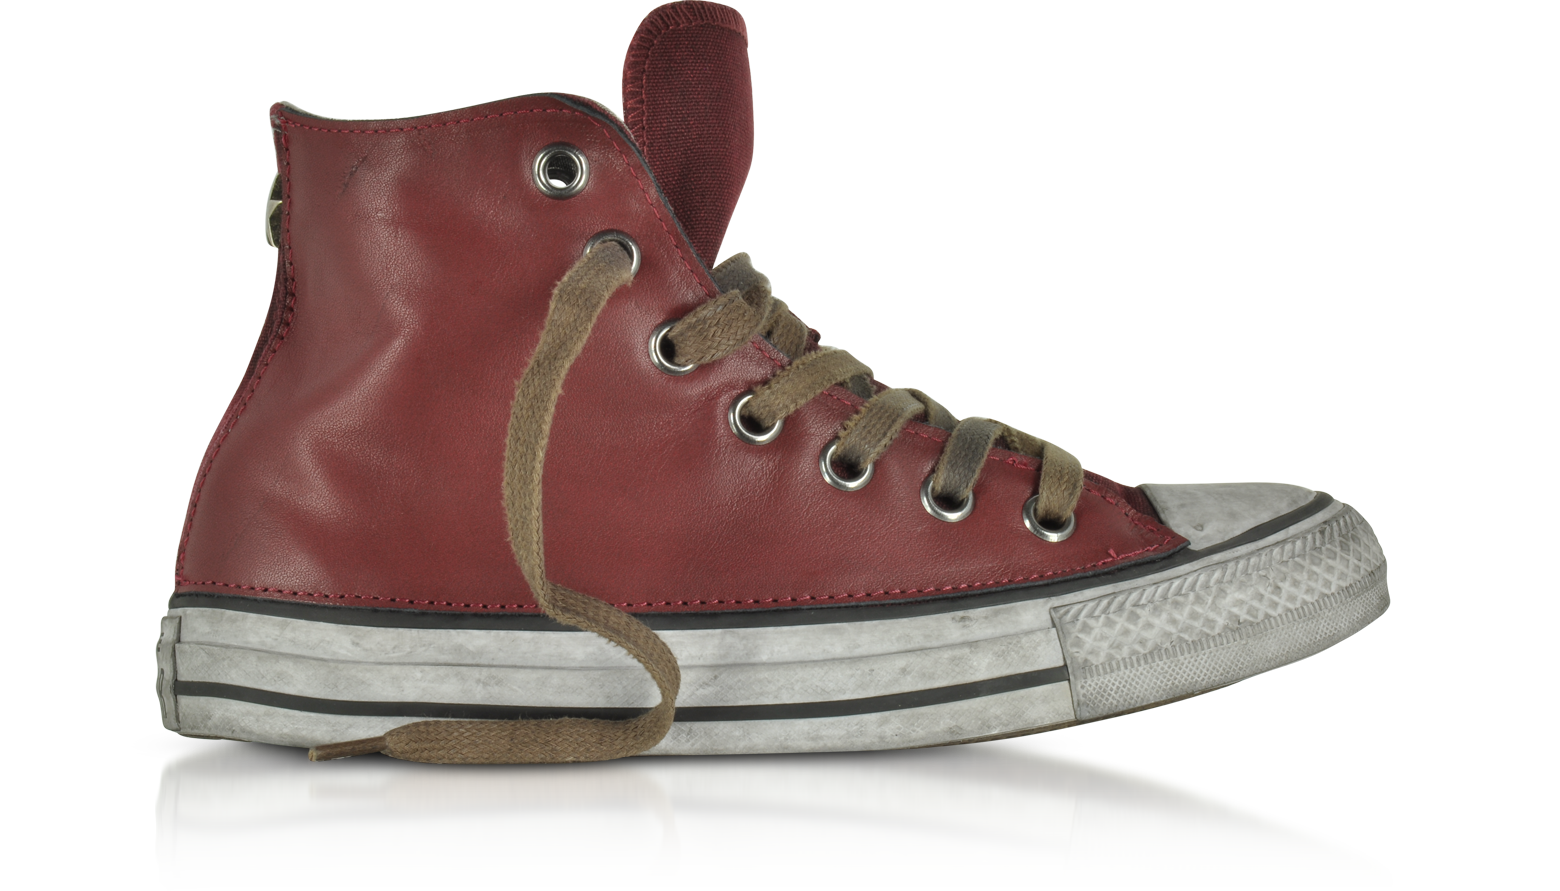 Converse Limited Edition Chuck Taylor All Star High Vintage Red Leather LTD  Unisex Sneakers 4.5 (6.5 WOMENS US | 4.5 UK | 37 EU) at FORZIERI